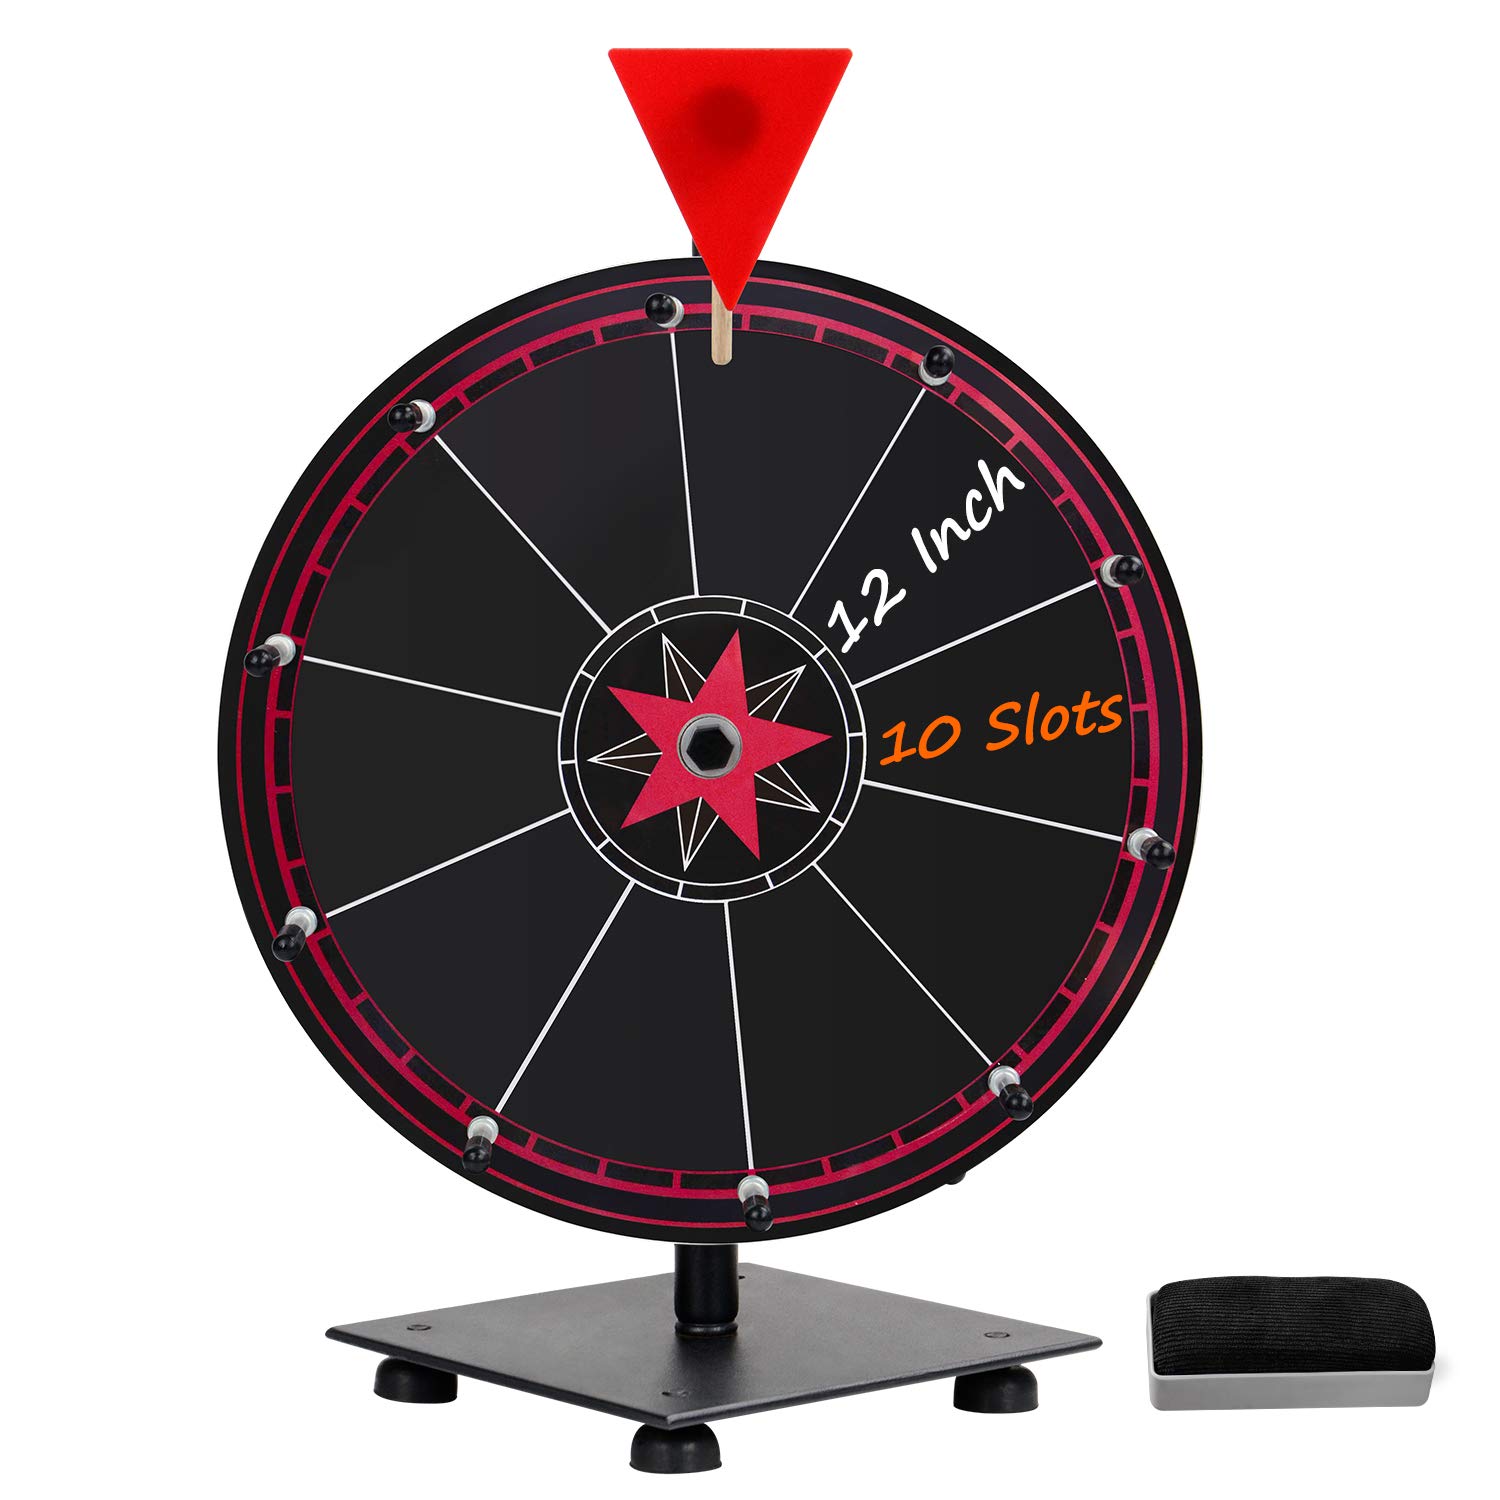 t-sign Spinning Wheel for Prizes, 10 Slots color Prize Wheel with Eraser, 12 Inch Spin Wheel with Stand, Roulette Wheel for Tabletop -